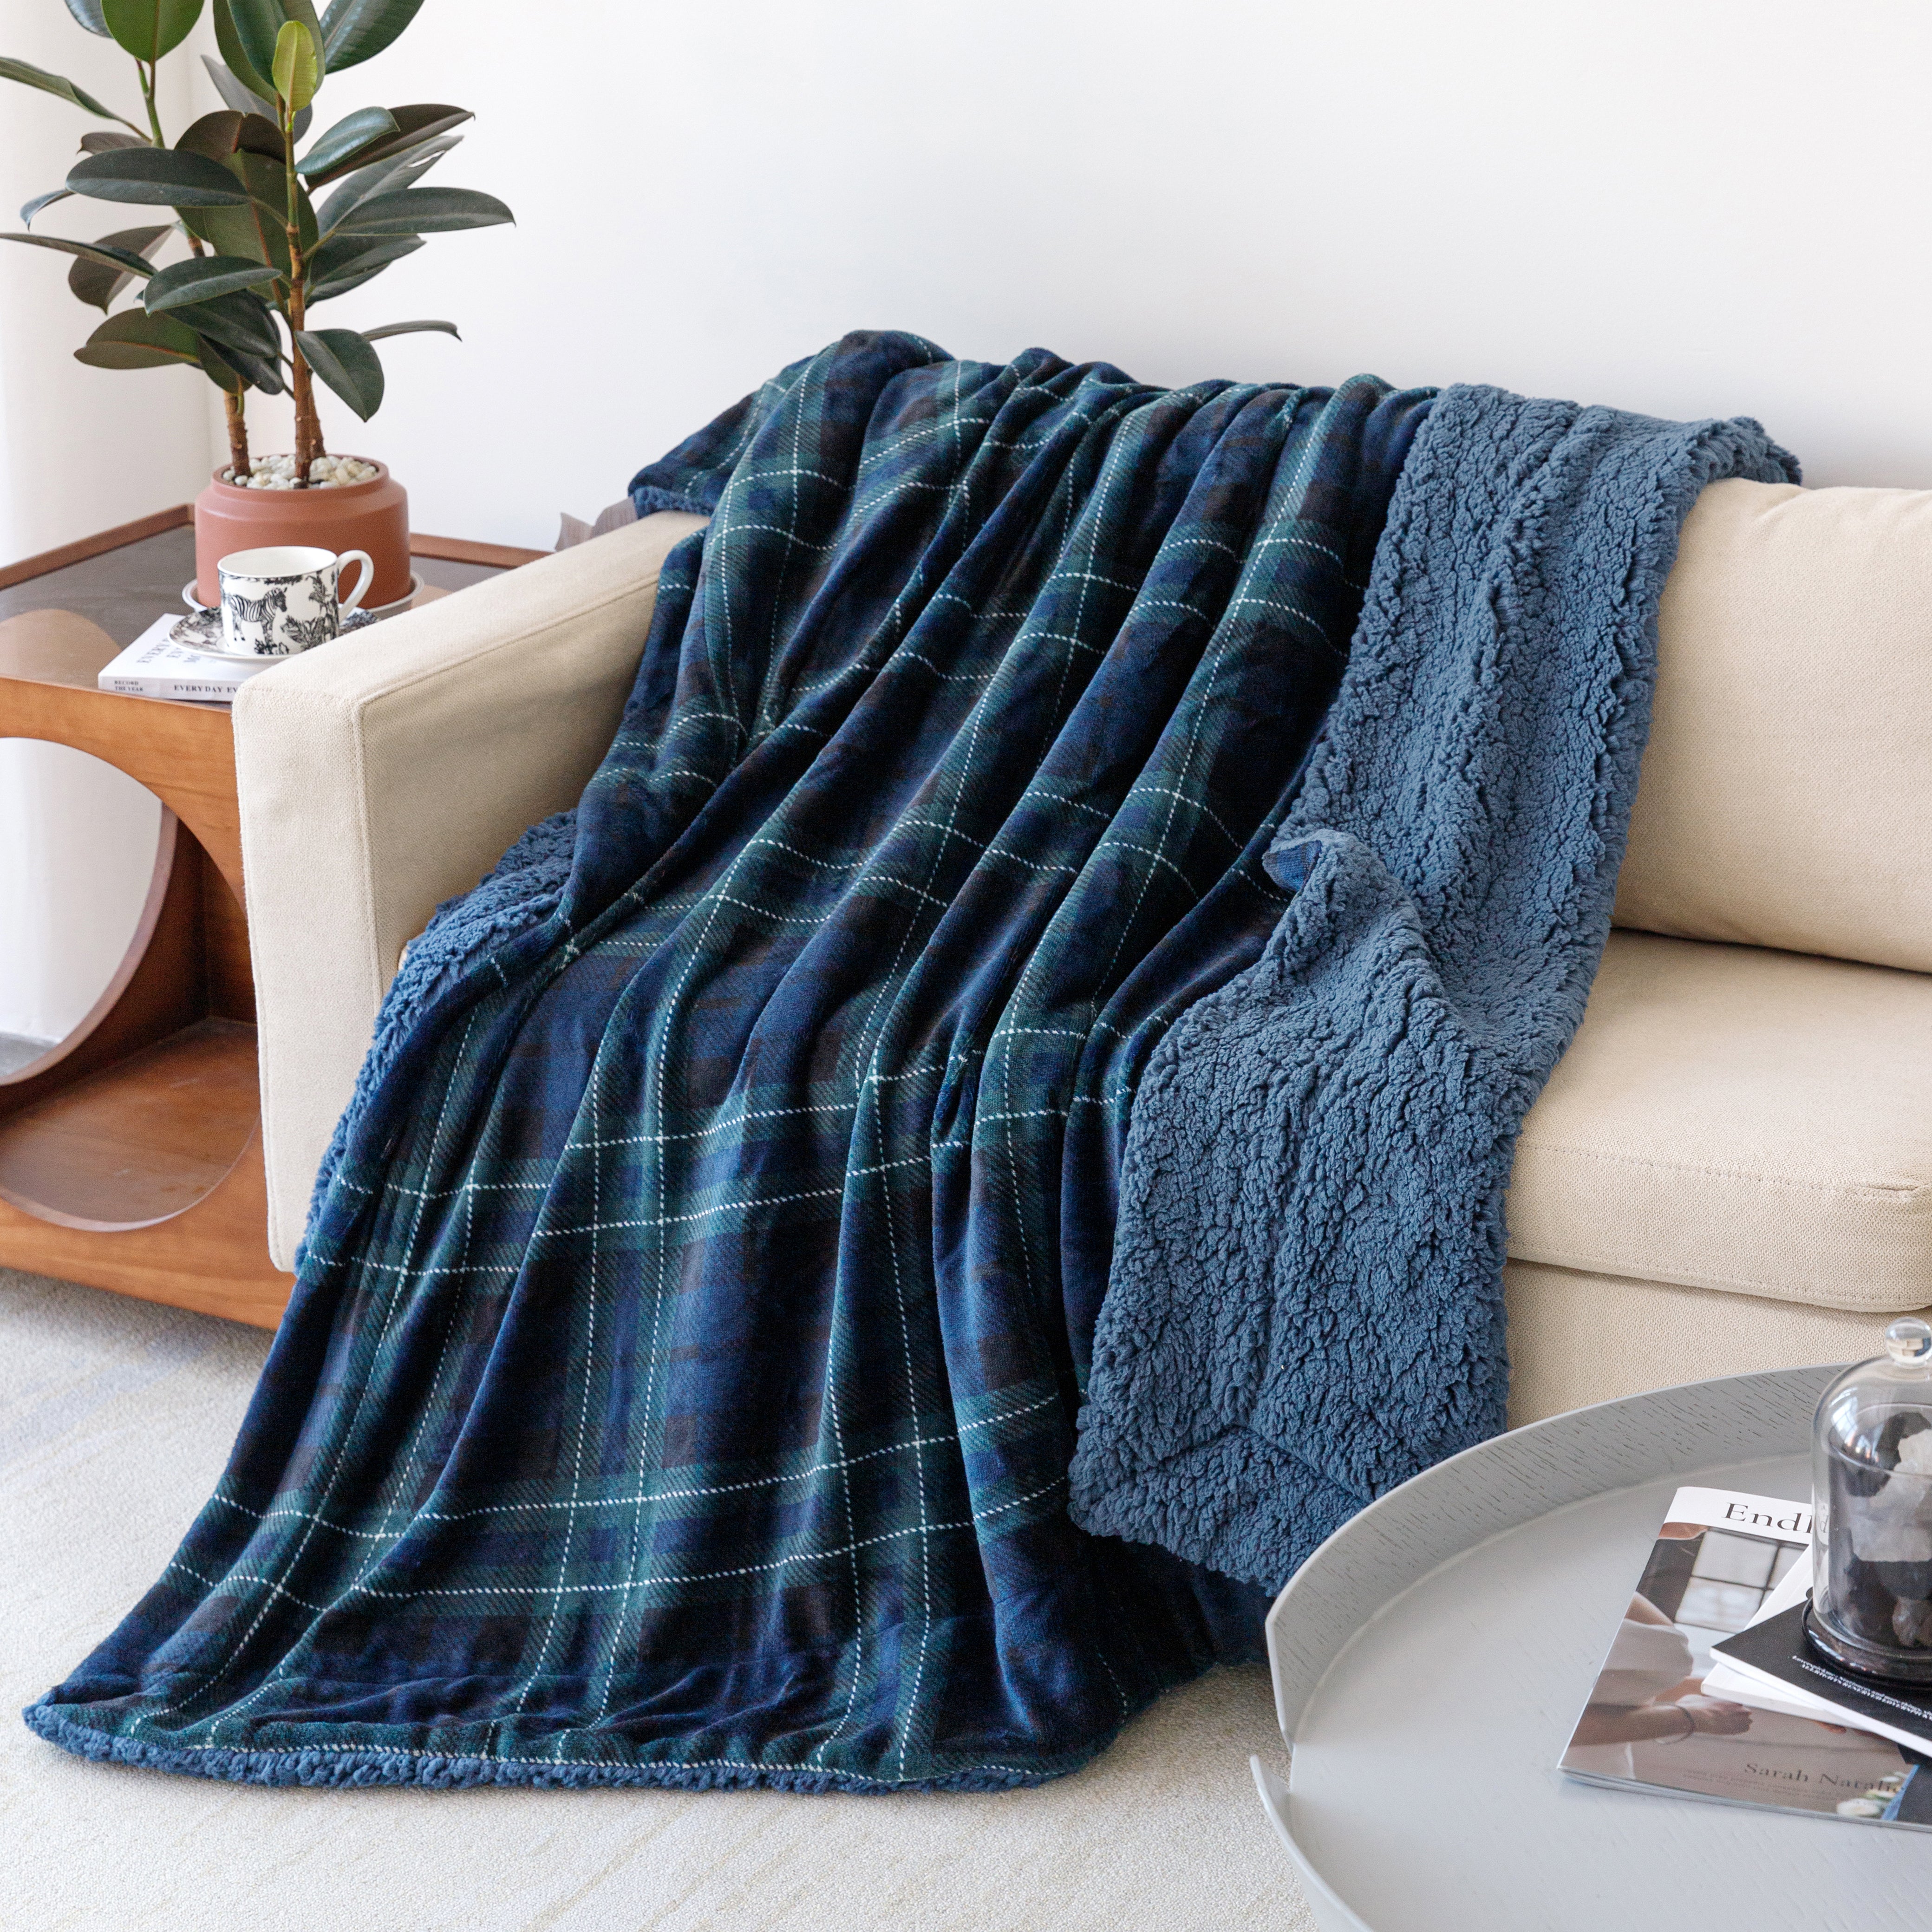 Velvet to Sherpa Throw Blanket 50 x 60 inches Blue Plaid to Navy